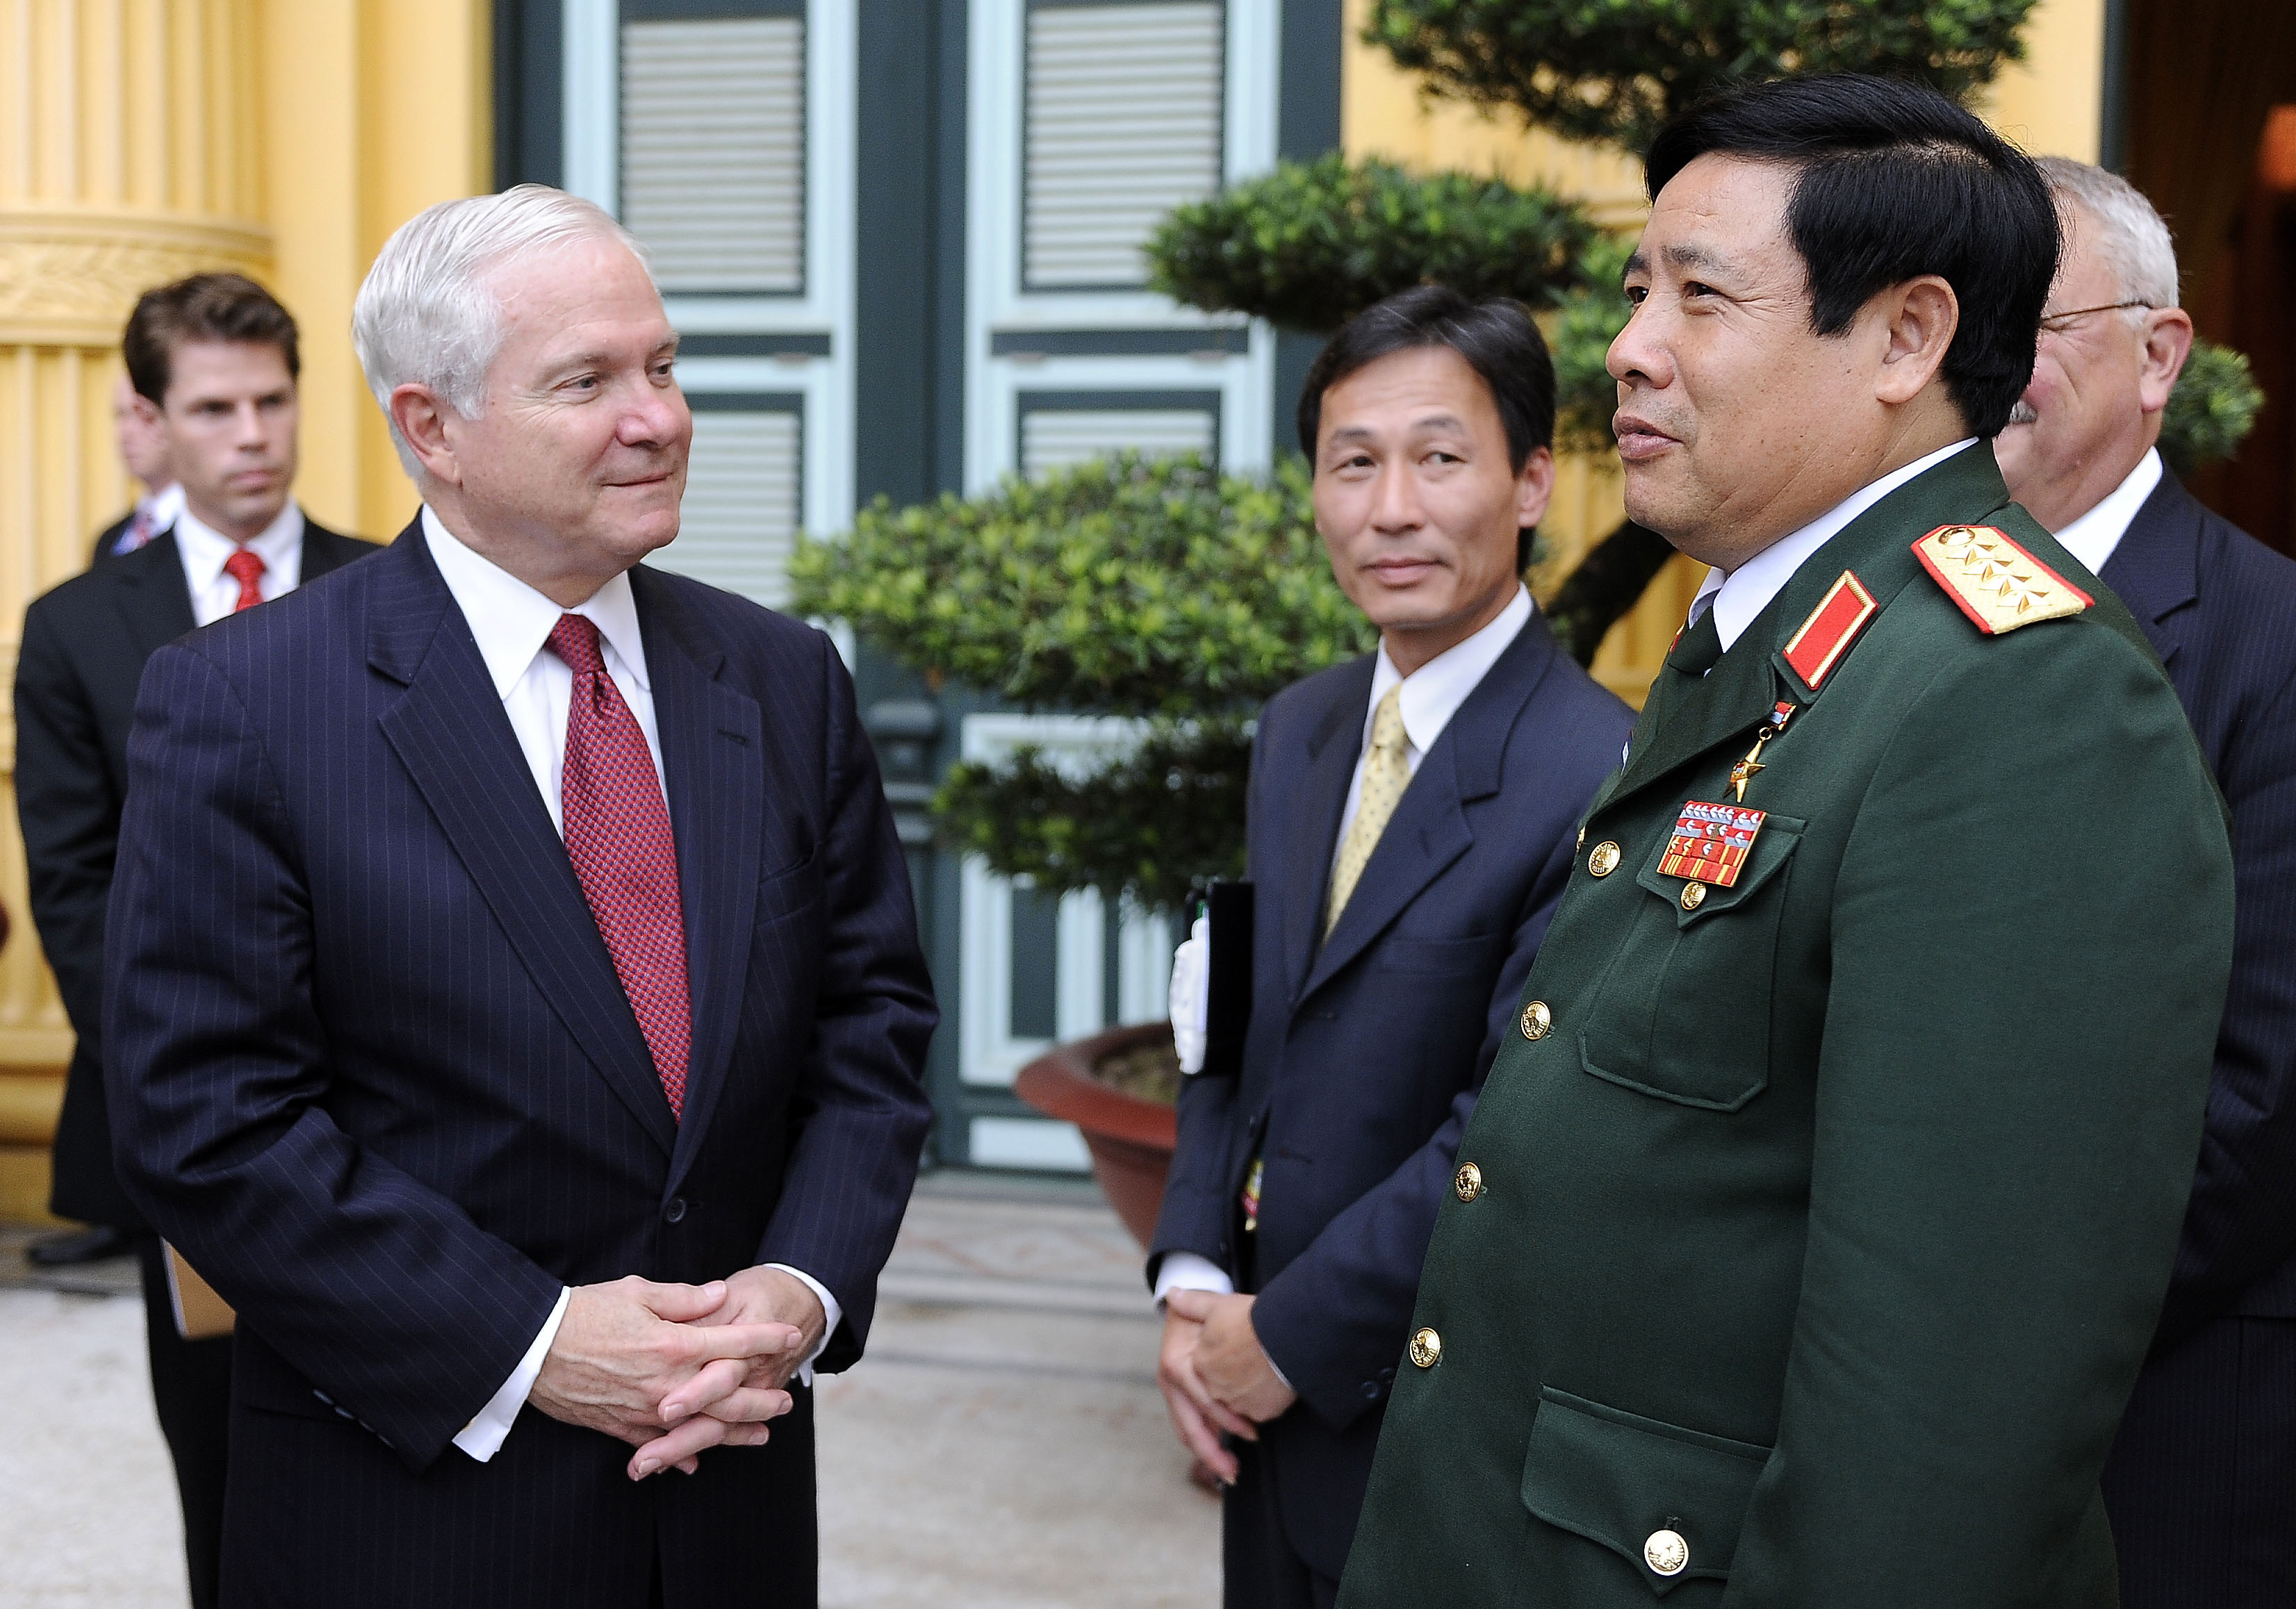 Defense.gov News Photo 101012-F-6655M-027 - Secretary of Defense Robert M. Gates talks with Vietnamese Defense Minister Phung Quang Thanh in the Presidential Palace during the Association of